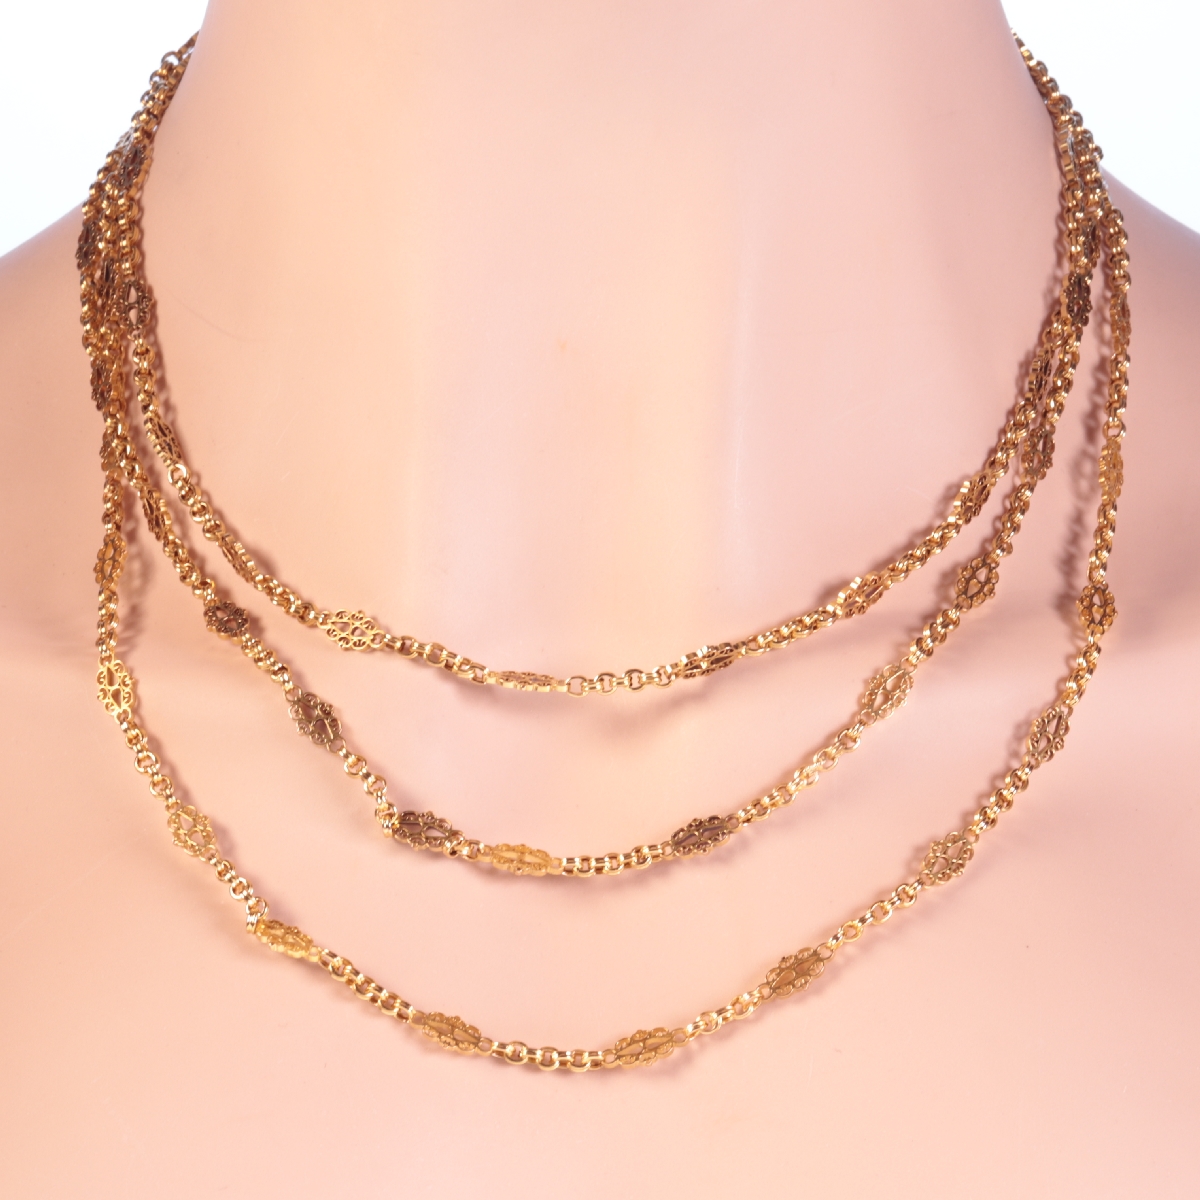 Antique Victorian long gold chain